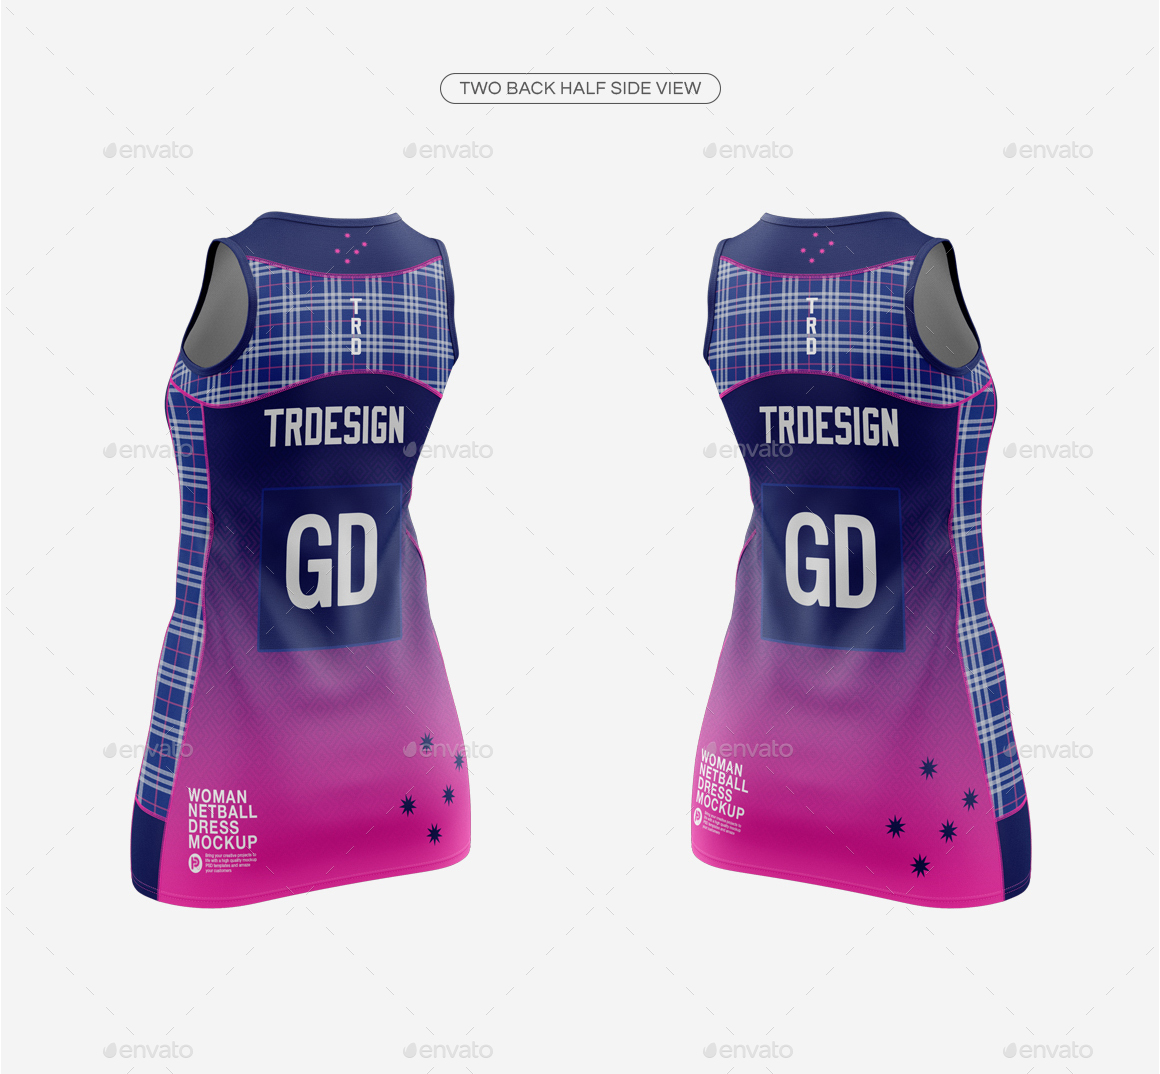 Download Women's Netball Dress Mockup V1 by TRDesignme | GraphicRiver